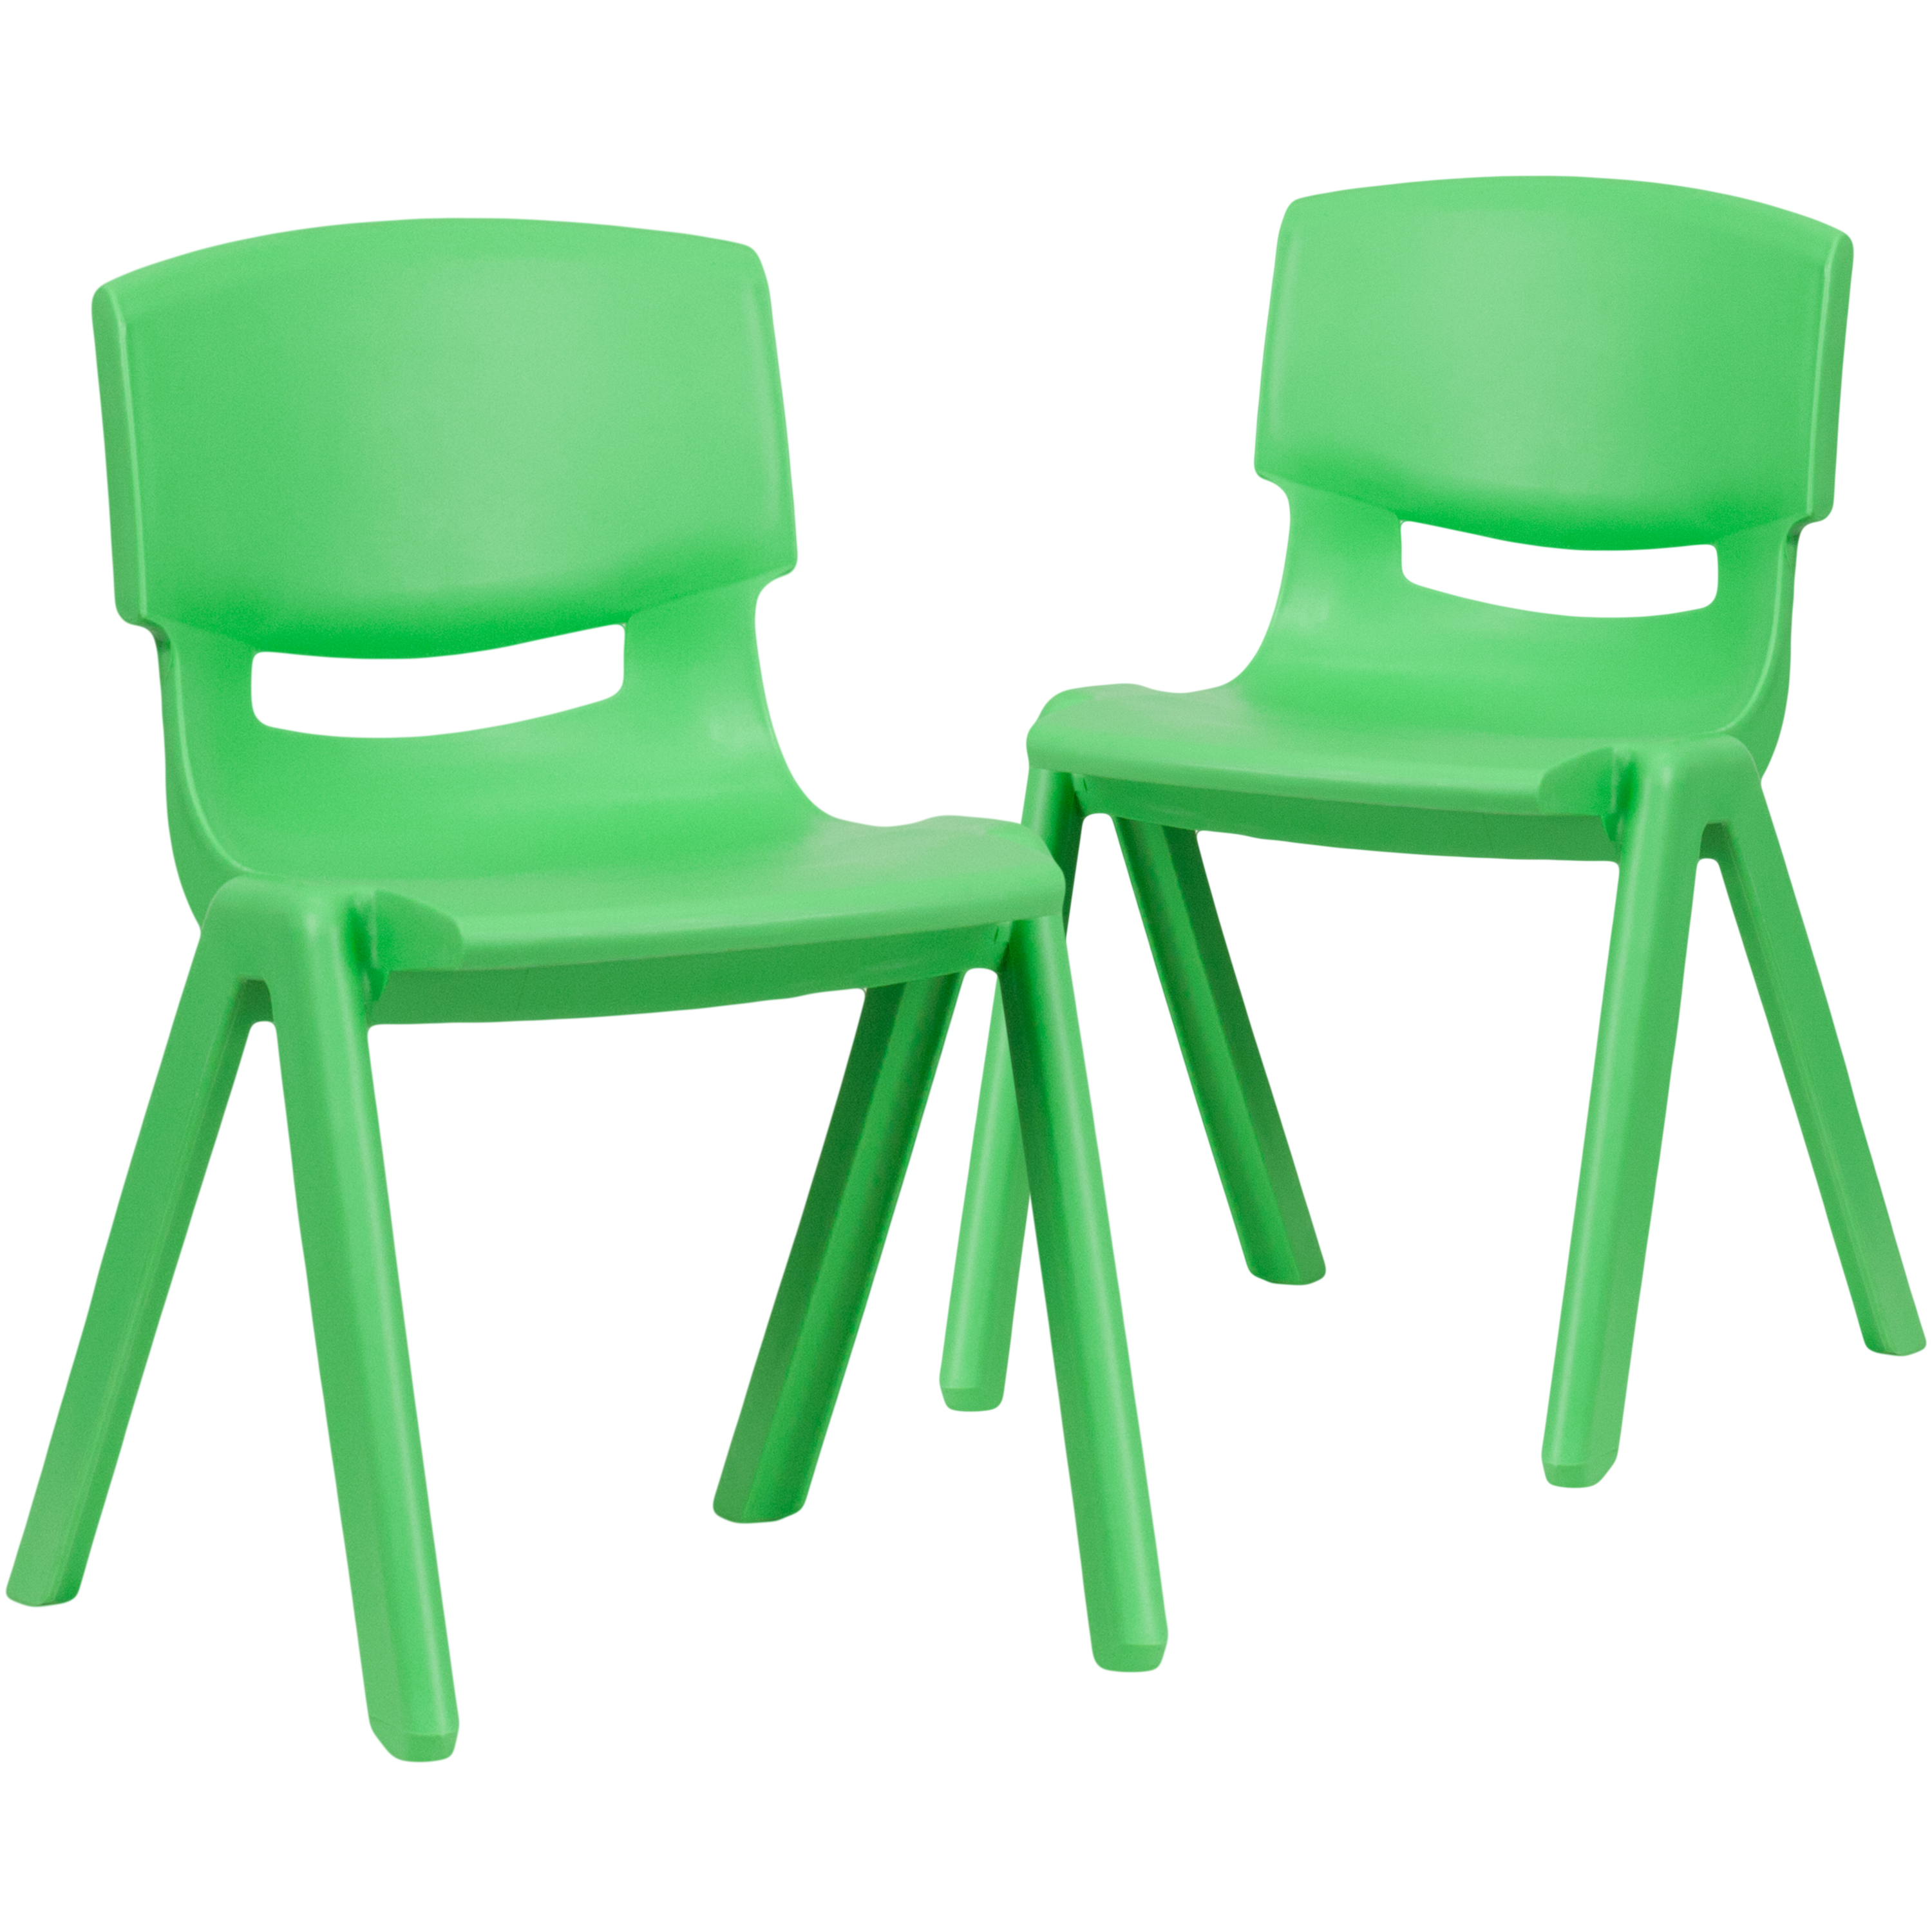 Flash Furniture 2-YU-YCX-004-GREEN-GG Green Plastic Stackable School Chair with 13.25" Seat Height, 2 Pack